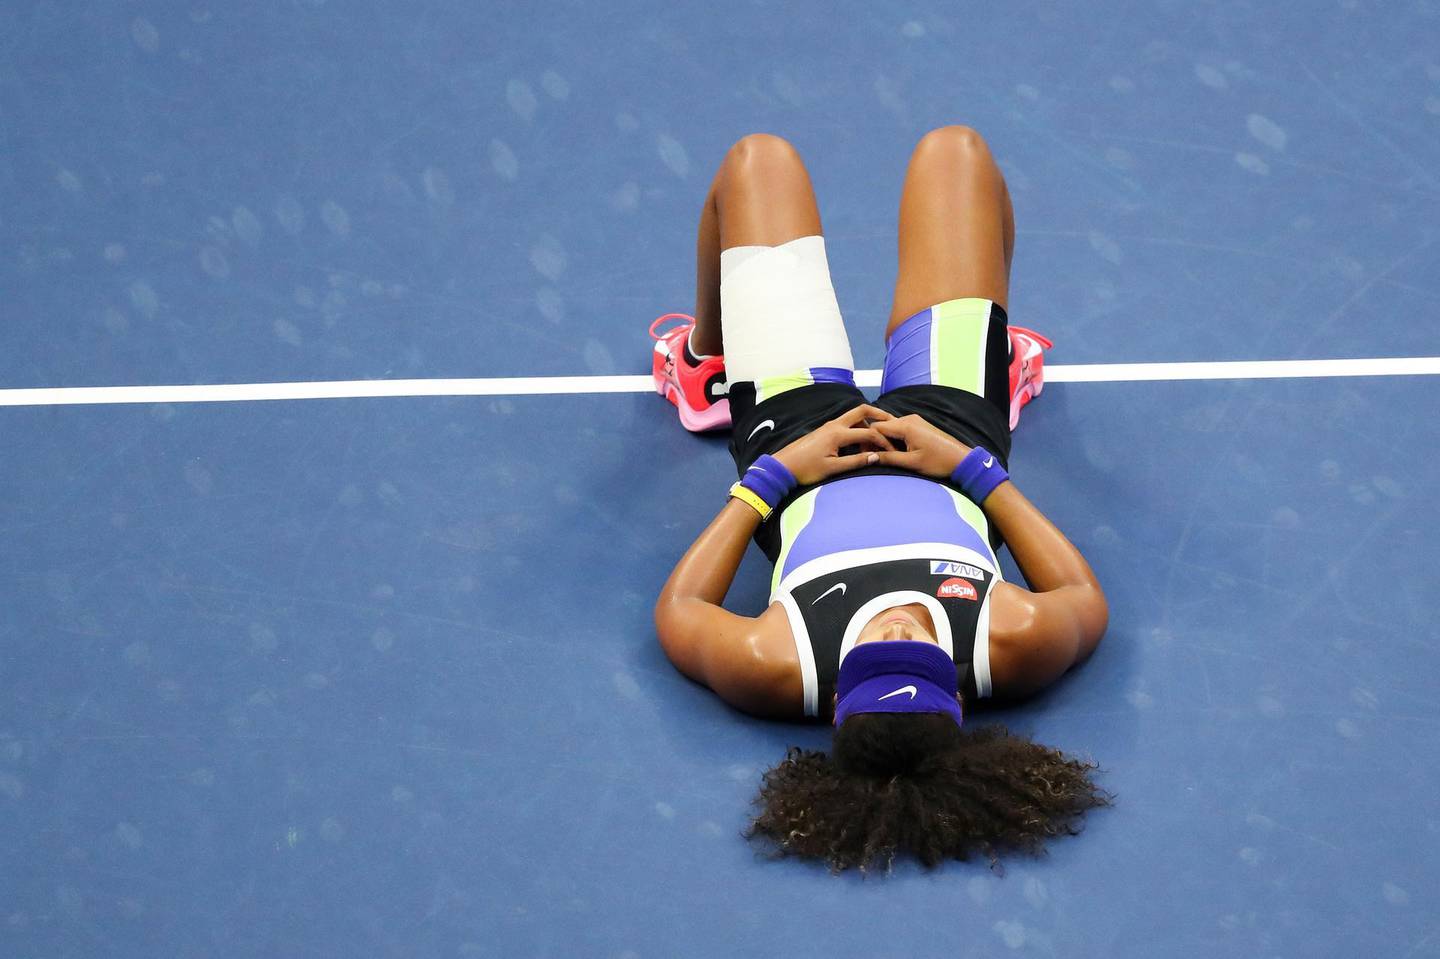 NEW YORK, NEW YORK - SEPTEMBER 12: Naomi Osaka of Japan lays down in celebration after winning her Women's Singles final match against Victoria Azarenka of Belarus on Day Thirteen of the 2020 US Open at the USTA Billie Jean King National Tennis Center on September 12, 2020 in the Queens borough of New York City.   Matthew Stockman/Getty Images/AFP
== FOR NEWSPAPERS, INTERNET, TELCOS & TELEVISION USE ONLY ==
